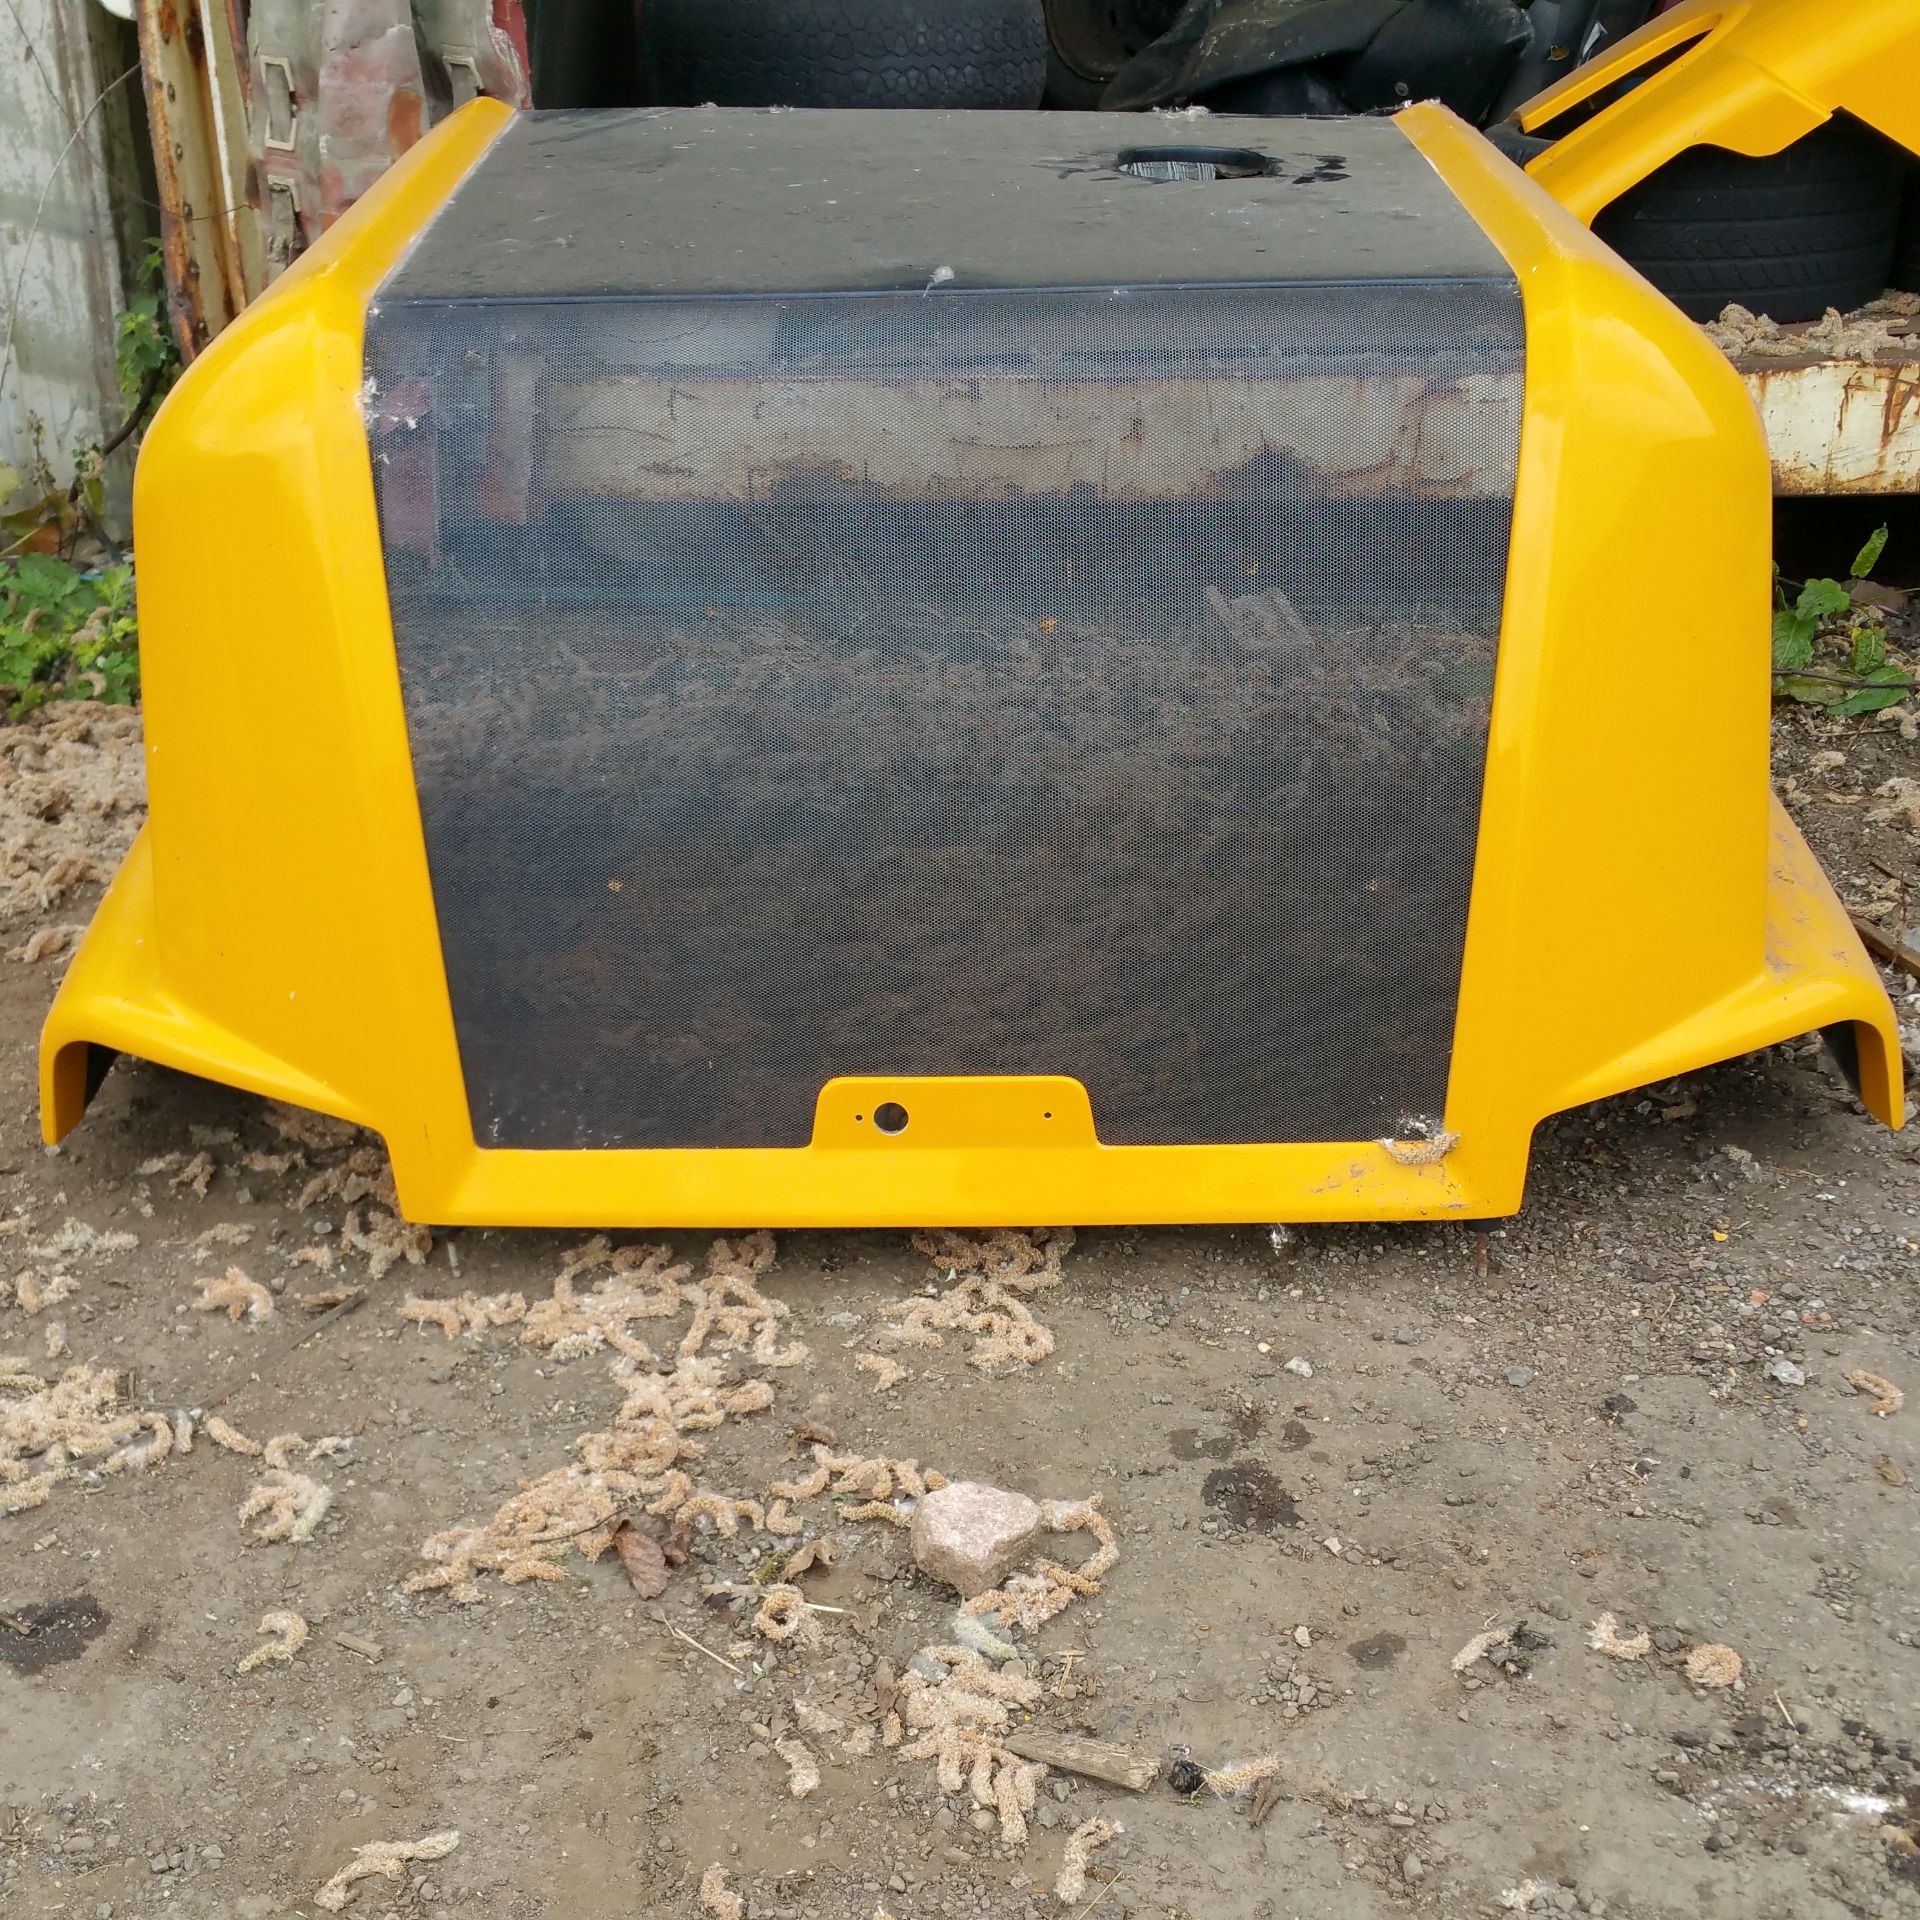 Jcb TM310 bonnet   New and unused   Delivery arranged - Image 4 of 5